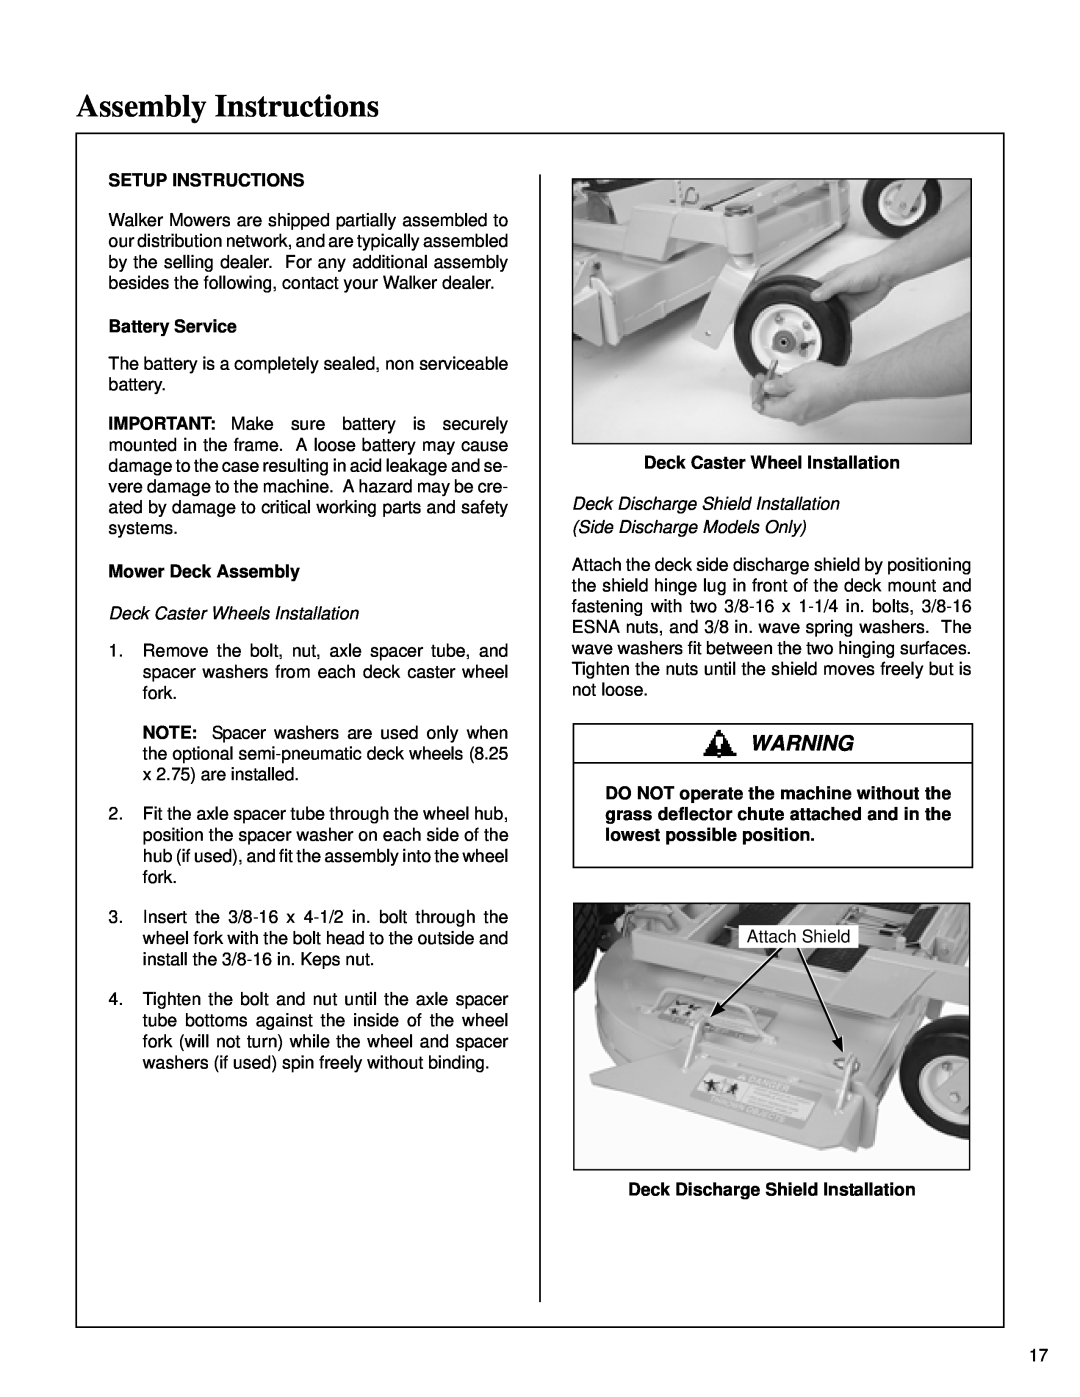 Briggs & Stratton MB (18 HP) owner manual Assembly Instructions, Setup Instructions, Battery Service, Mower Deck Assembly 